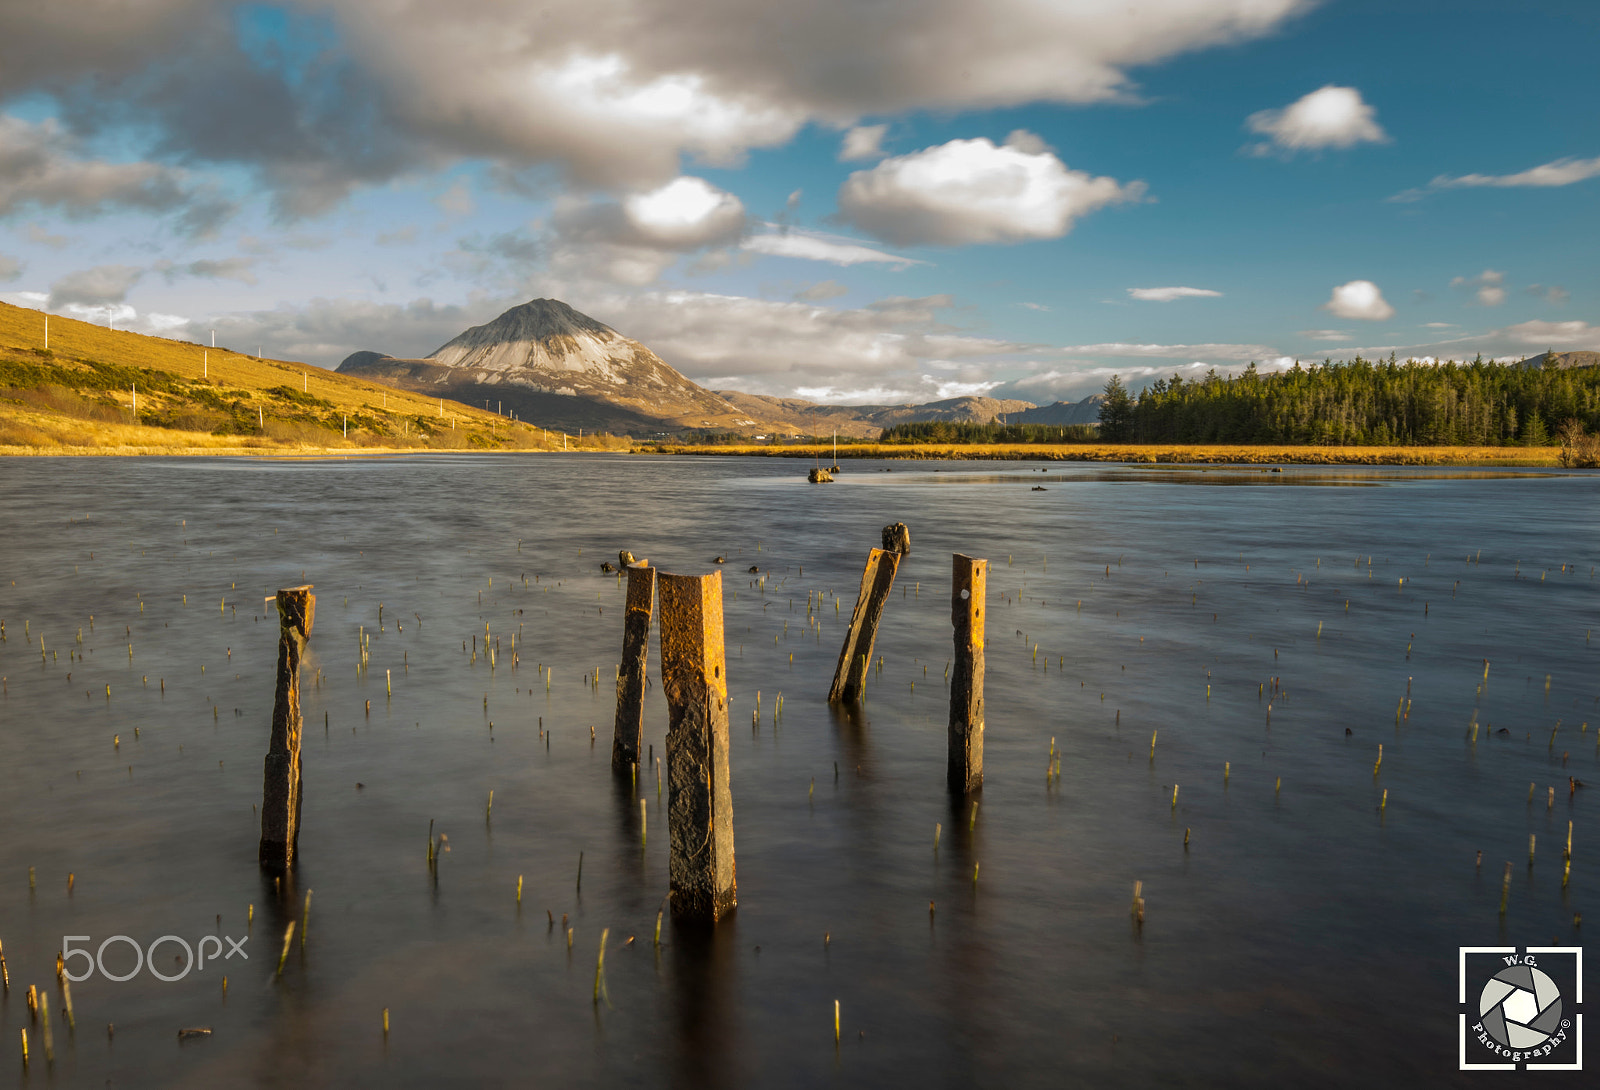 Nikon D5300 sample photo. Mount errigal, county donegal, ireland, another pl photography